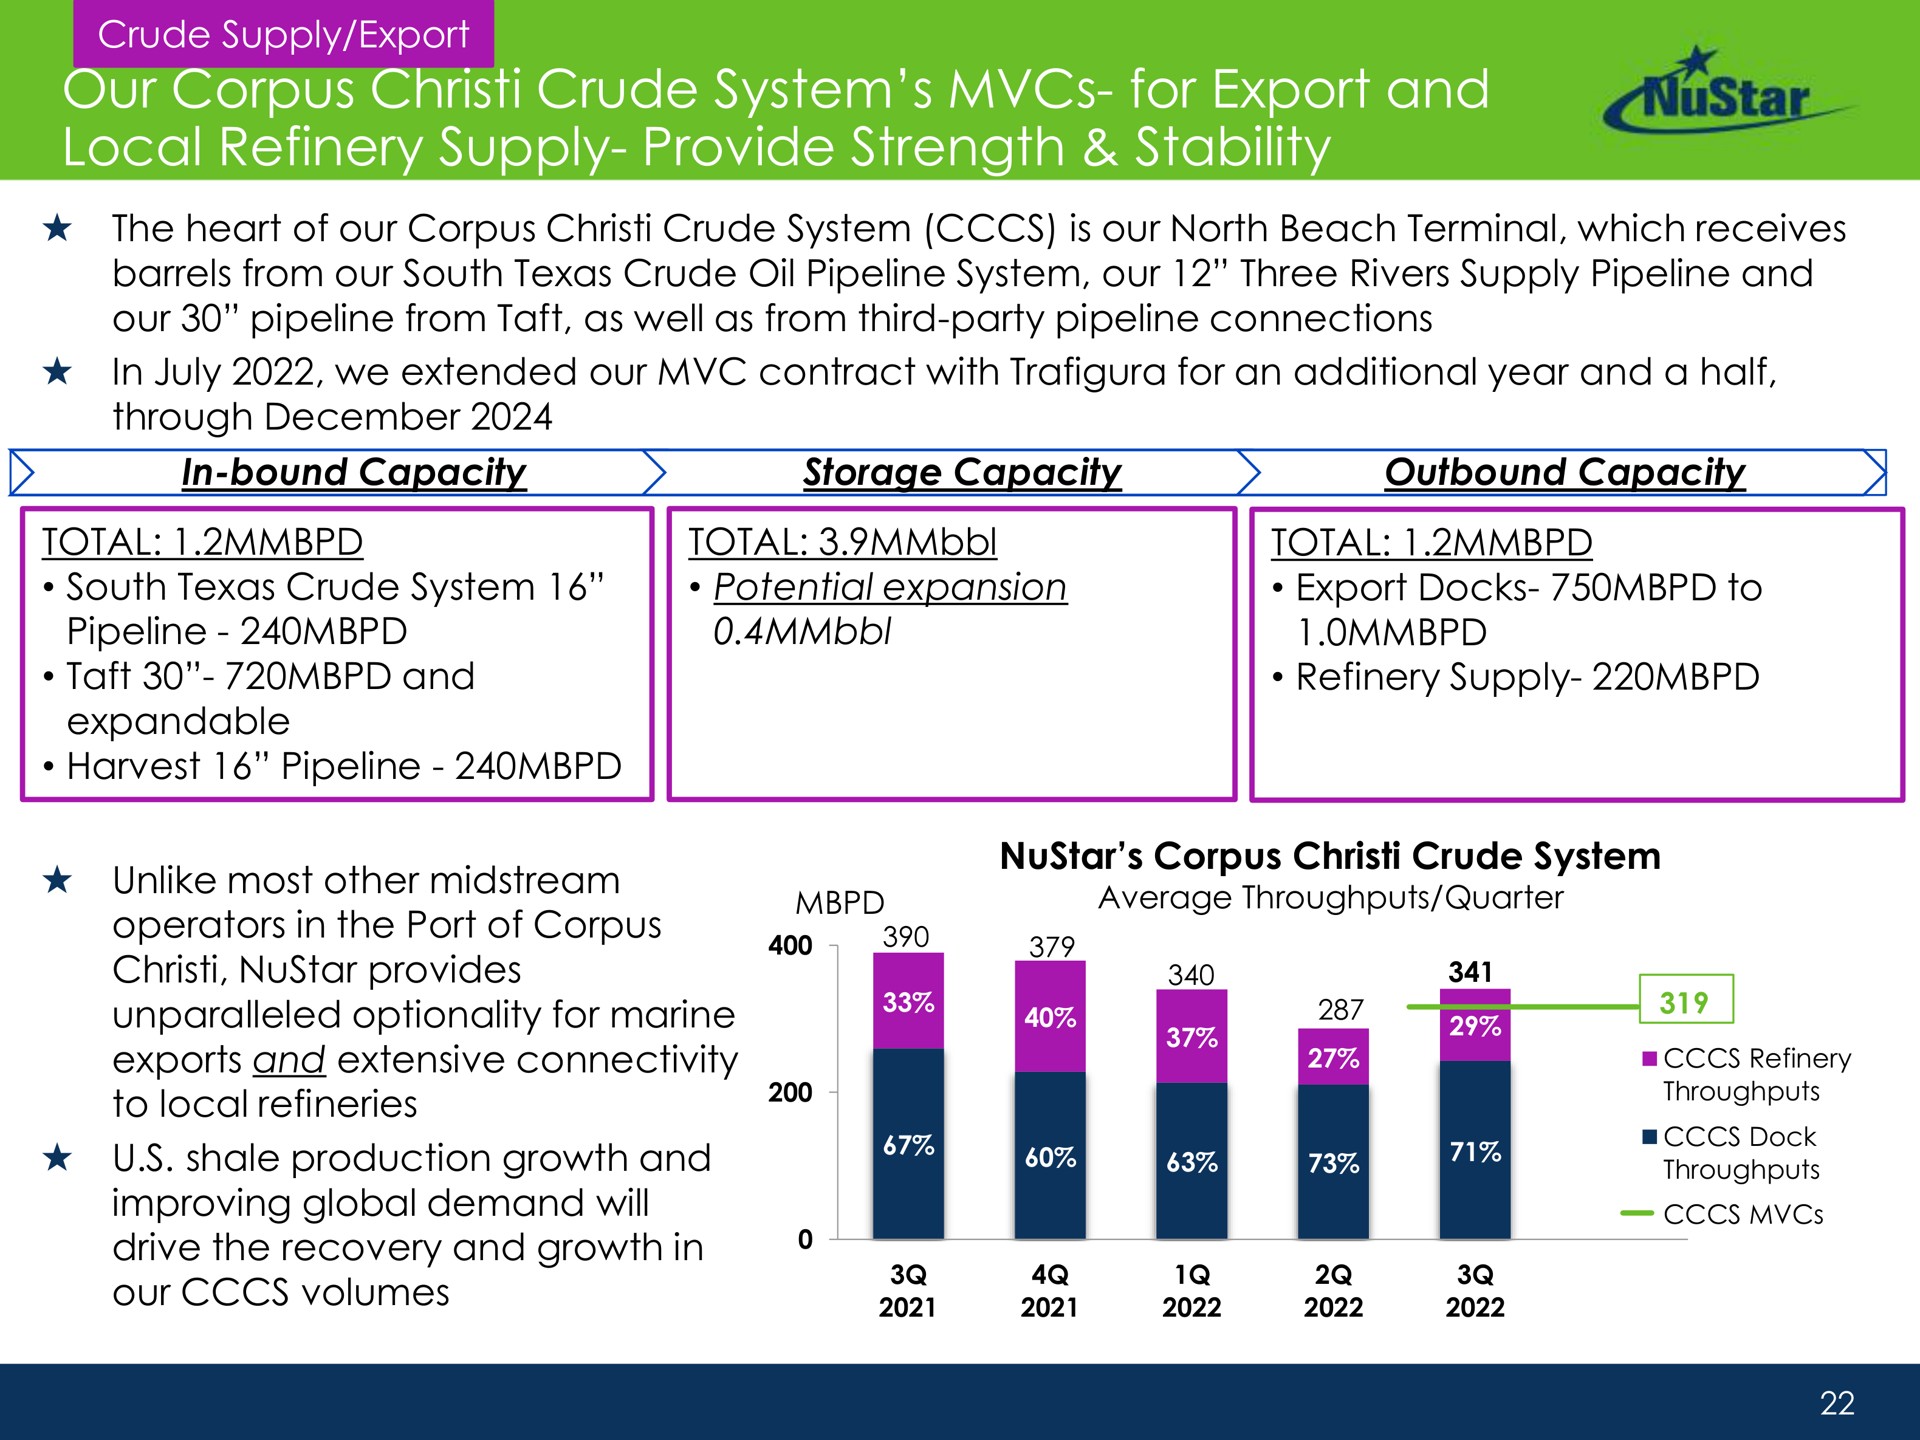 our corpus crude system for export and local refinery supply provide strength stability to refineries | NuStar Energy